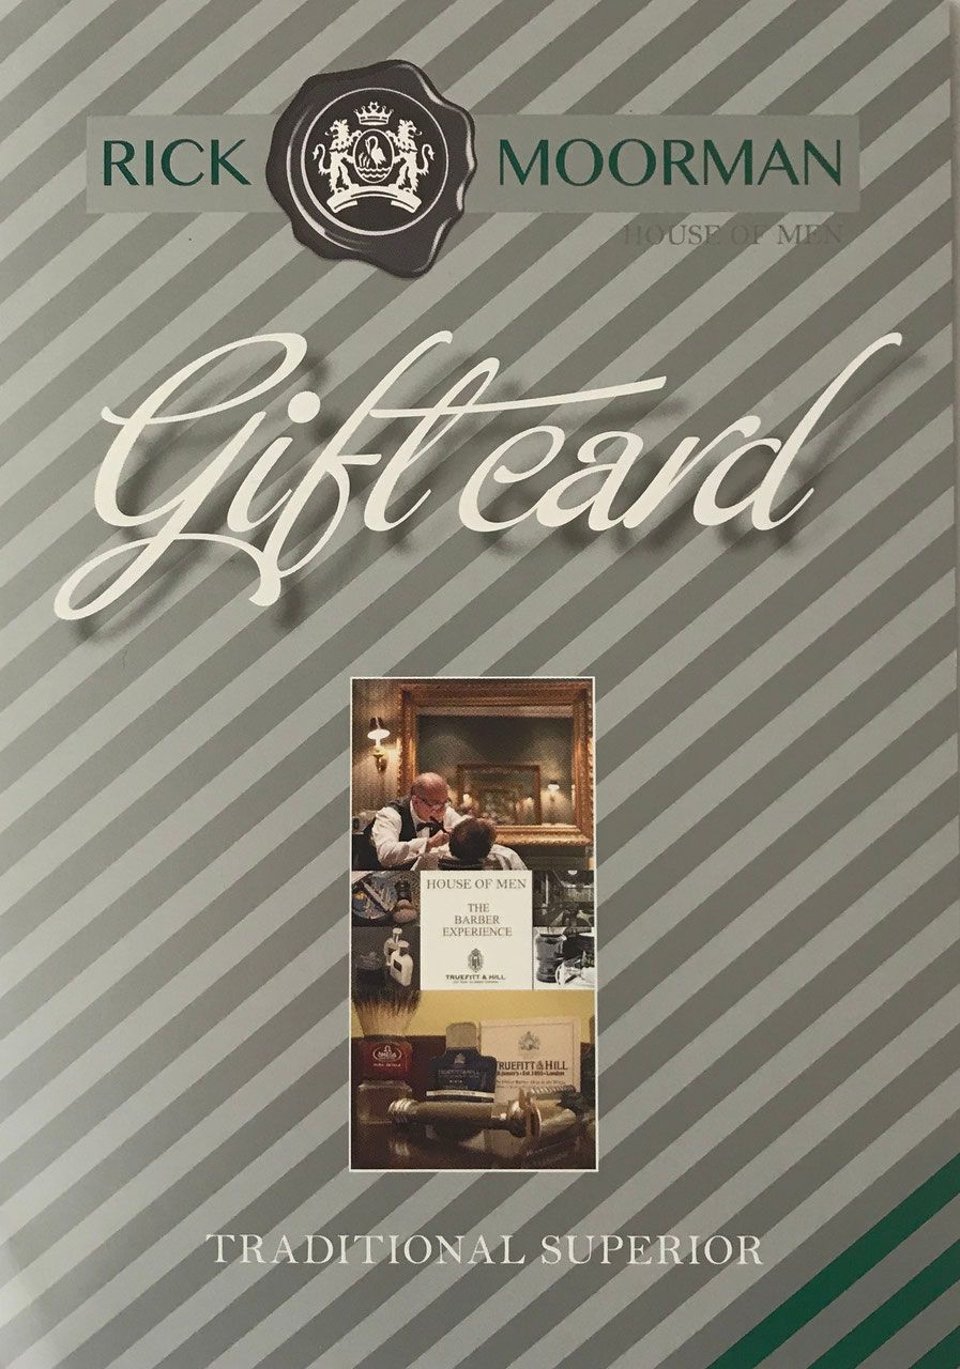 Giftcard Barbershop - Traditional Superior